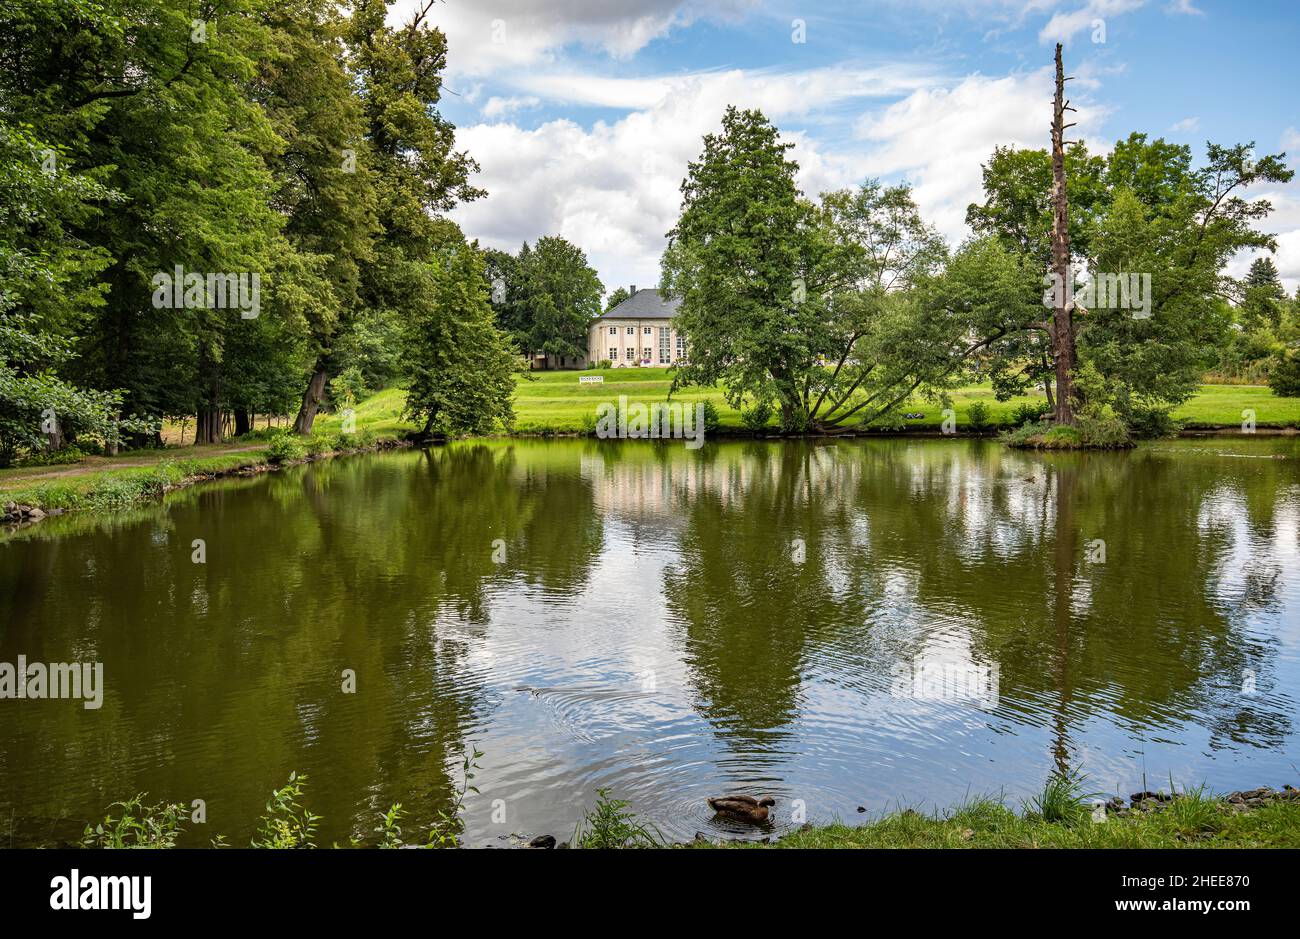 Pond In The Ebersdorf Palace Park With The Orangery In The Background ...